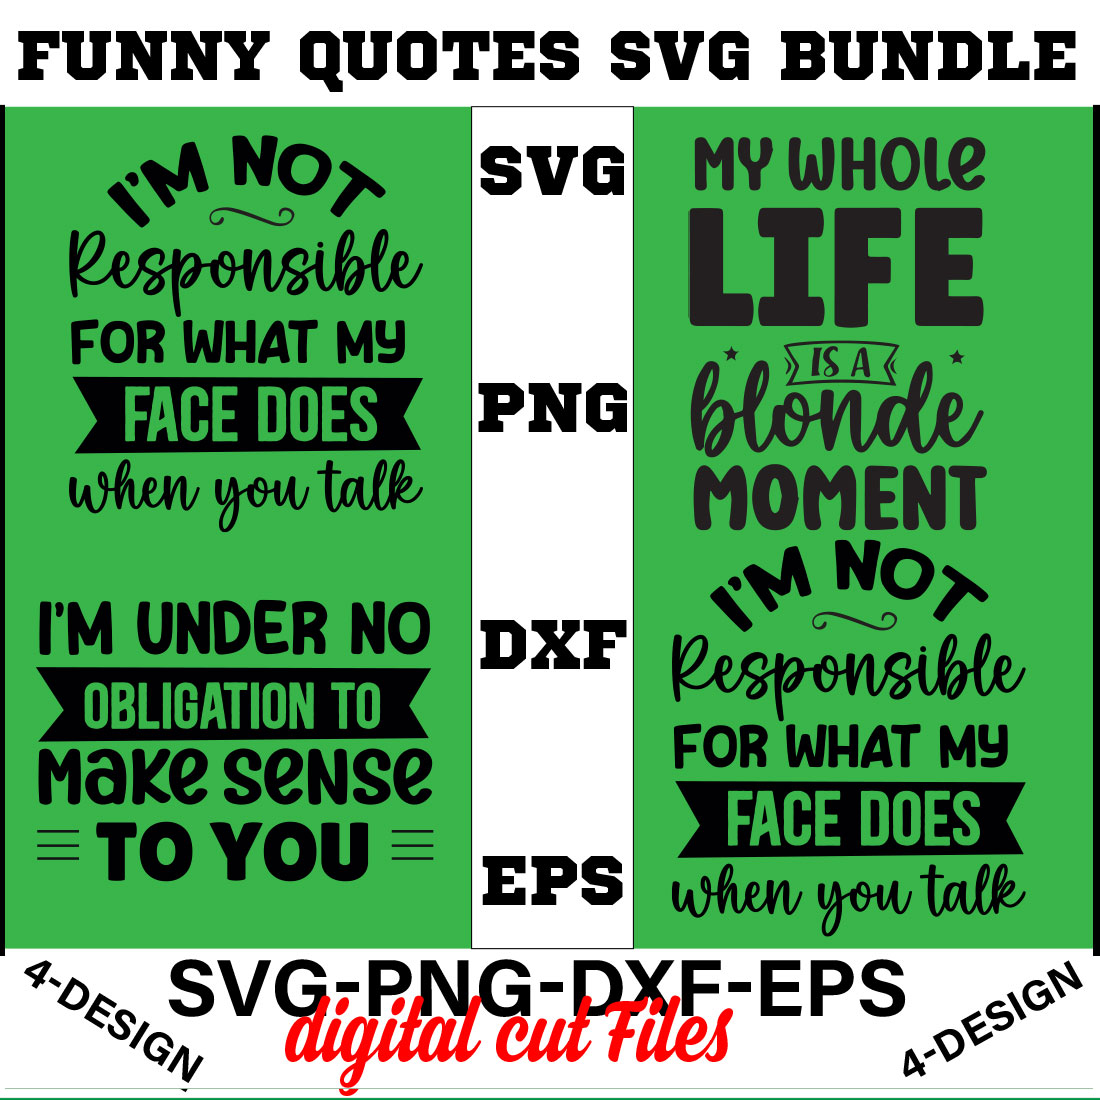 Funny Quotes SVG Bundle Vol-02 cover image.